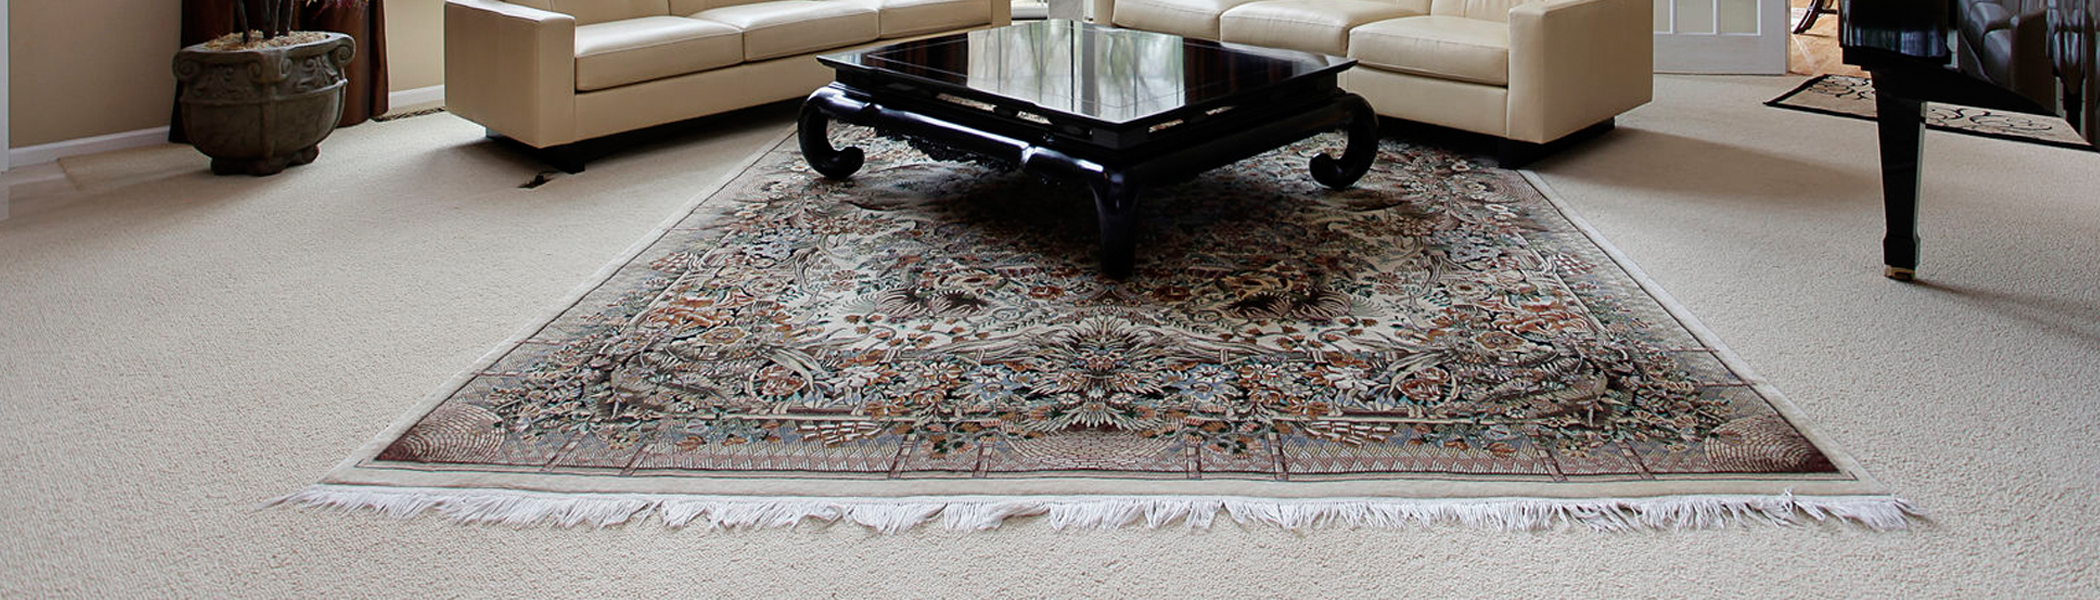 Professional Rug Cleaning Services